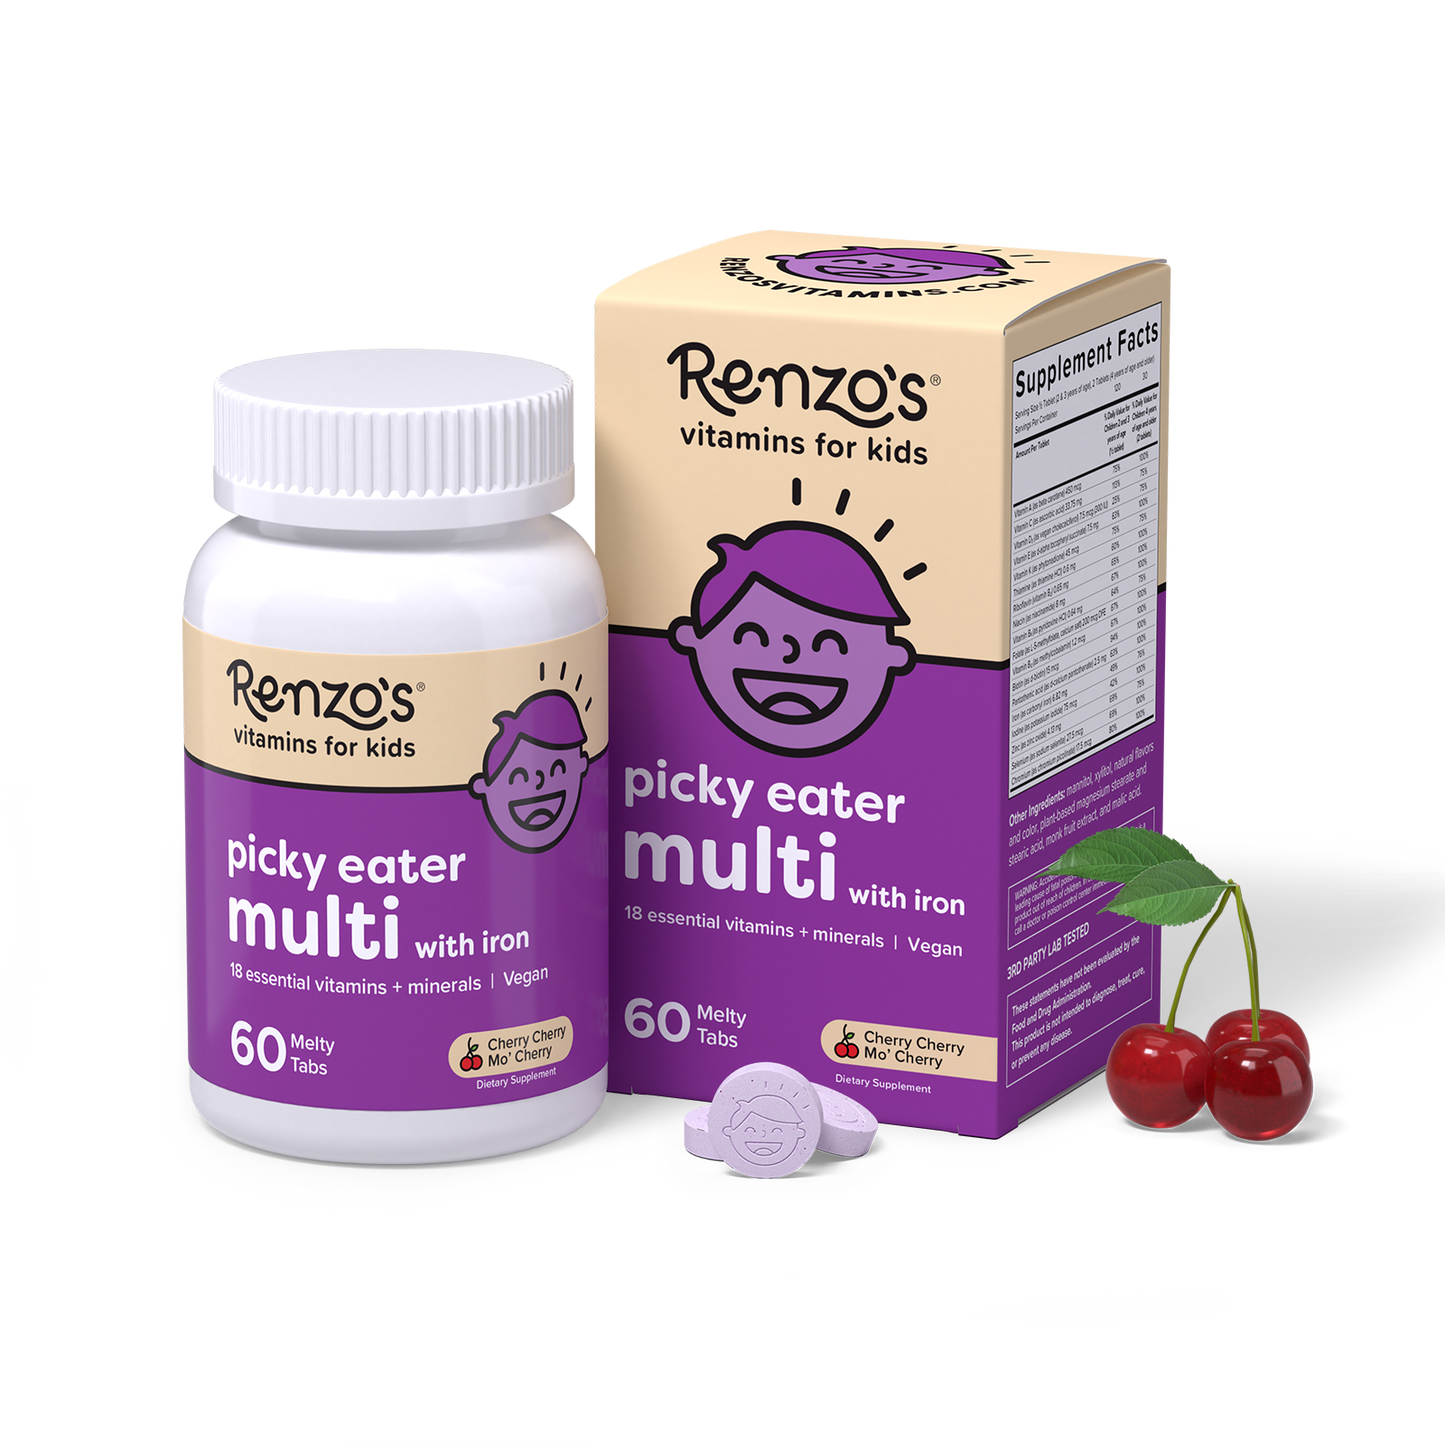 Renzo's Vitamins childrens multivitamin for picky eaters bottle and box upright on a white surface with the melty tablets displaying the Renzo's smiling kid logo and three cherries laying beside. This is the cherry-flavored multivitamin for kids with iron packaging